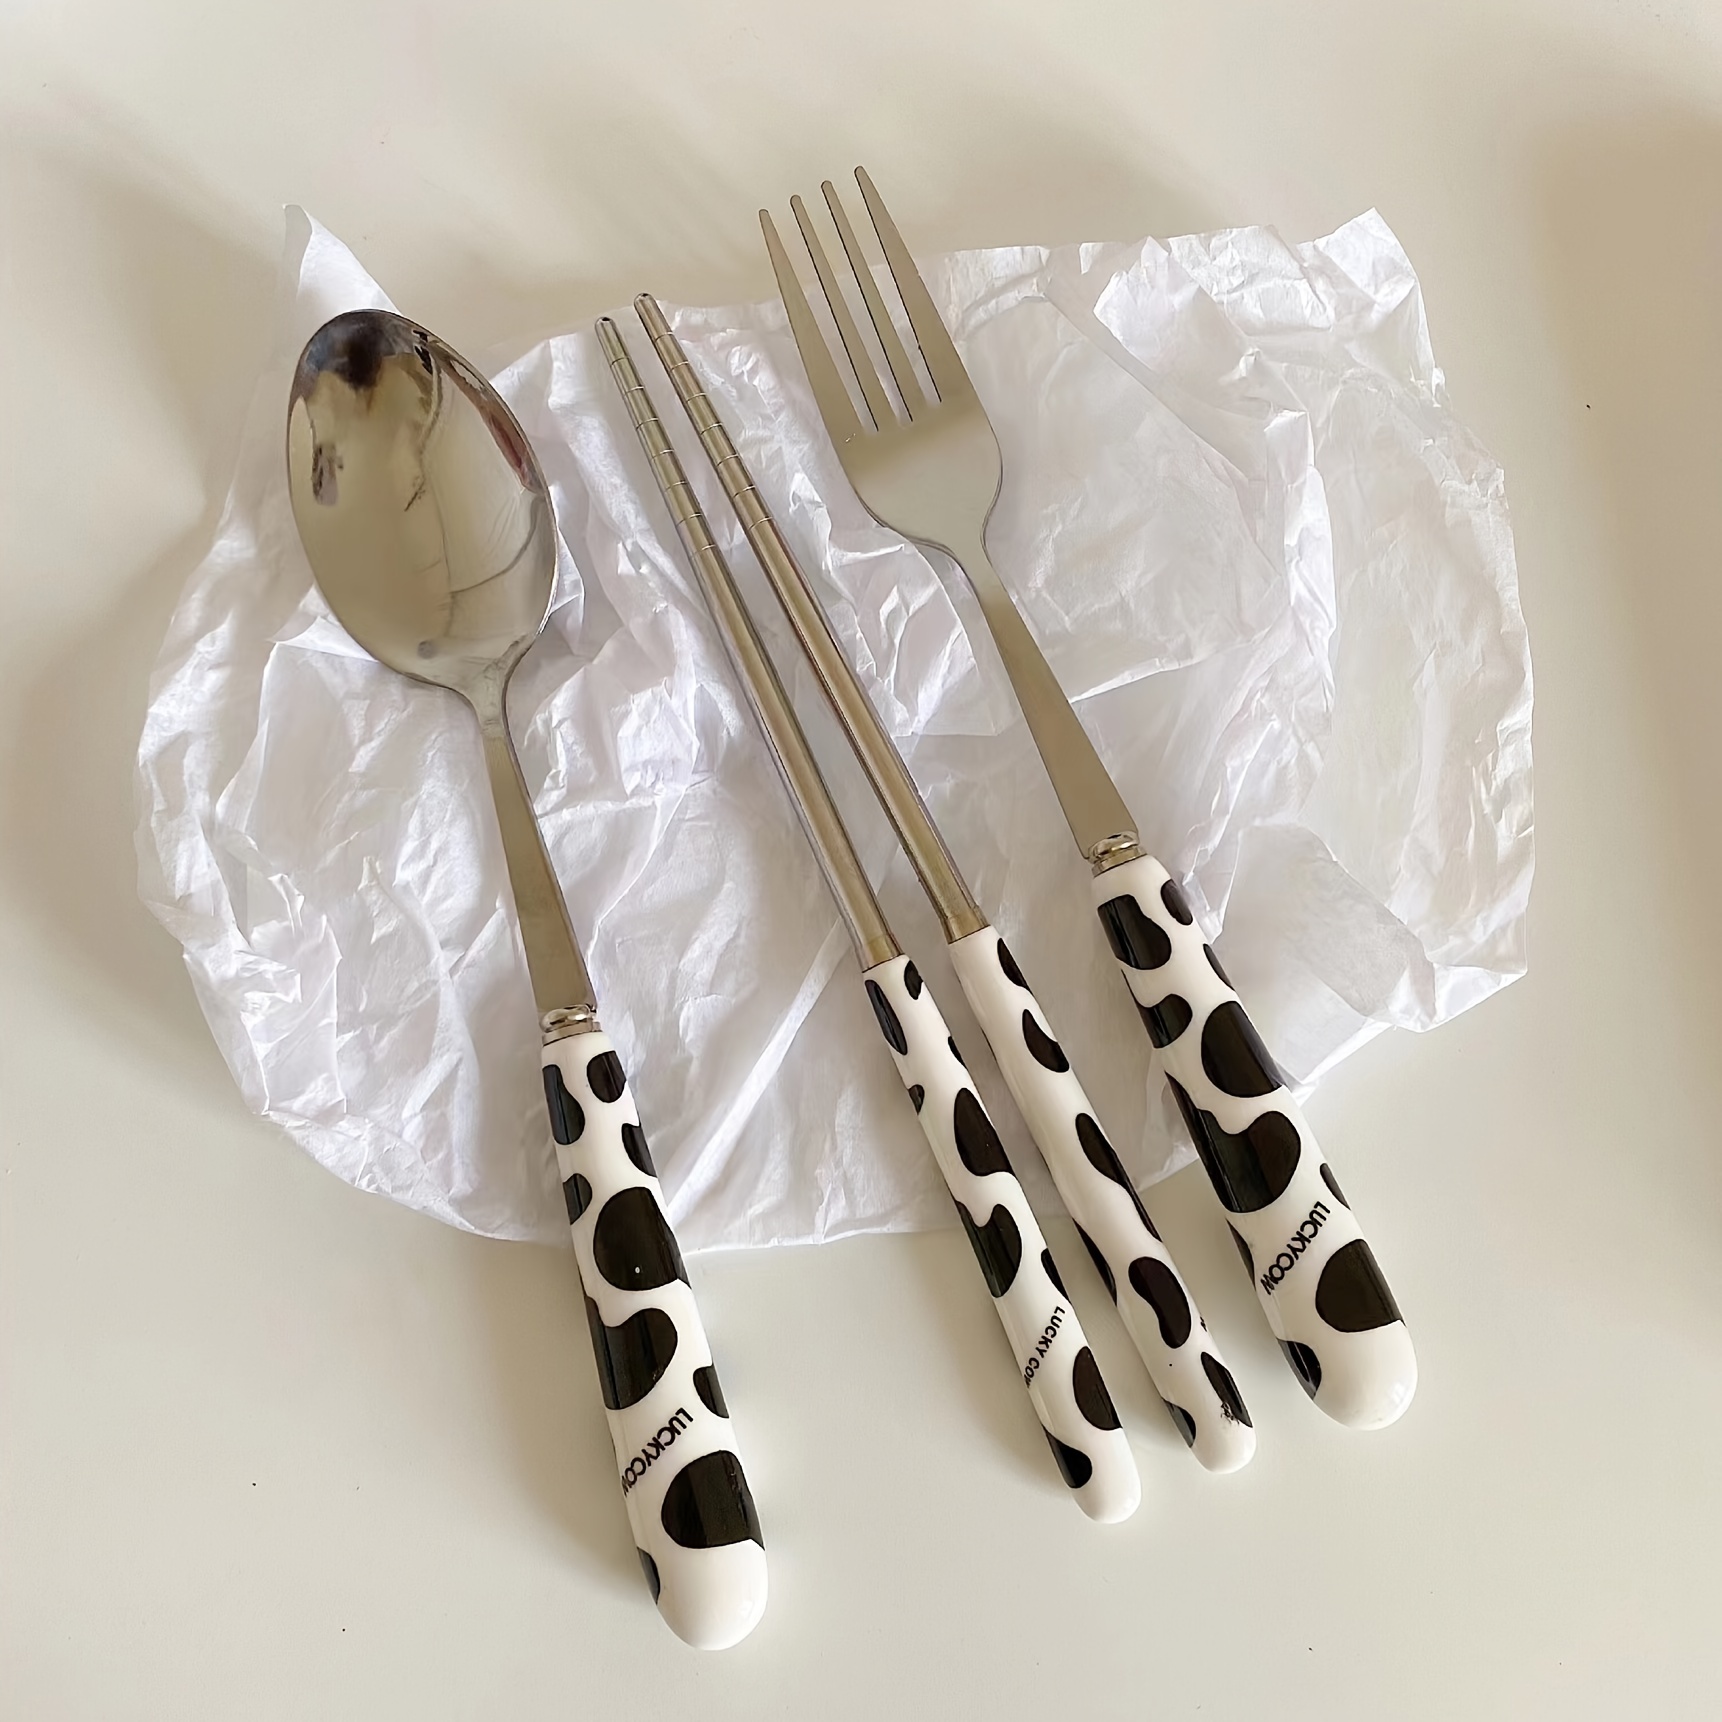 OLizee Cute Creative Cow Pattern Design Flatware Set of 3 Ceramics Handle Stainless Steel Spoon Fork Chopsticks for Traveling Portable Lovely Animals